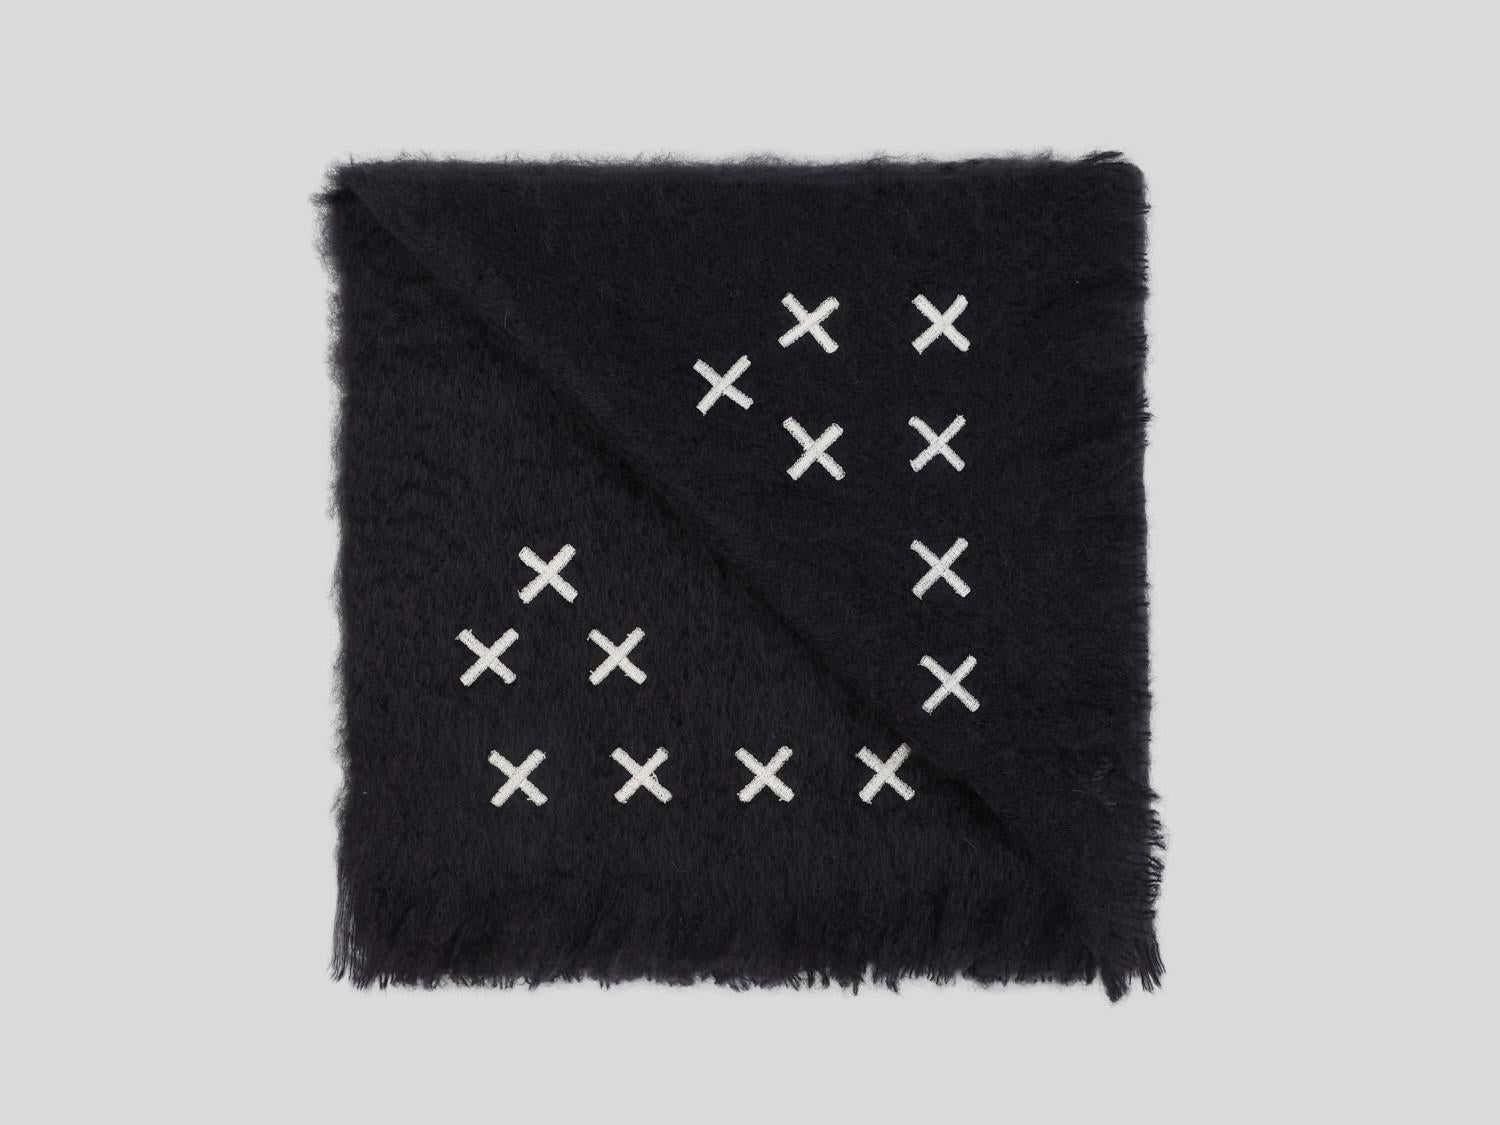 Hocken, a unique graphic black blanket made of the finest New Zealand mohair. This throw is embellished with small cream crosses embroidered by hand. Nothing as personal as your own interior, the colors of the fabric and embroidery can be customized